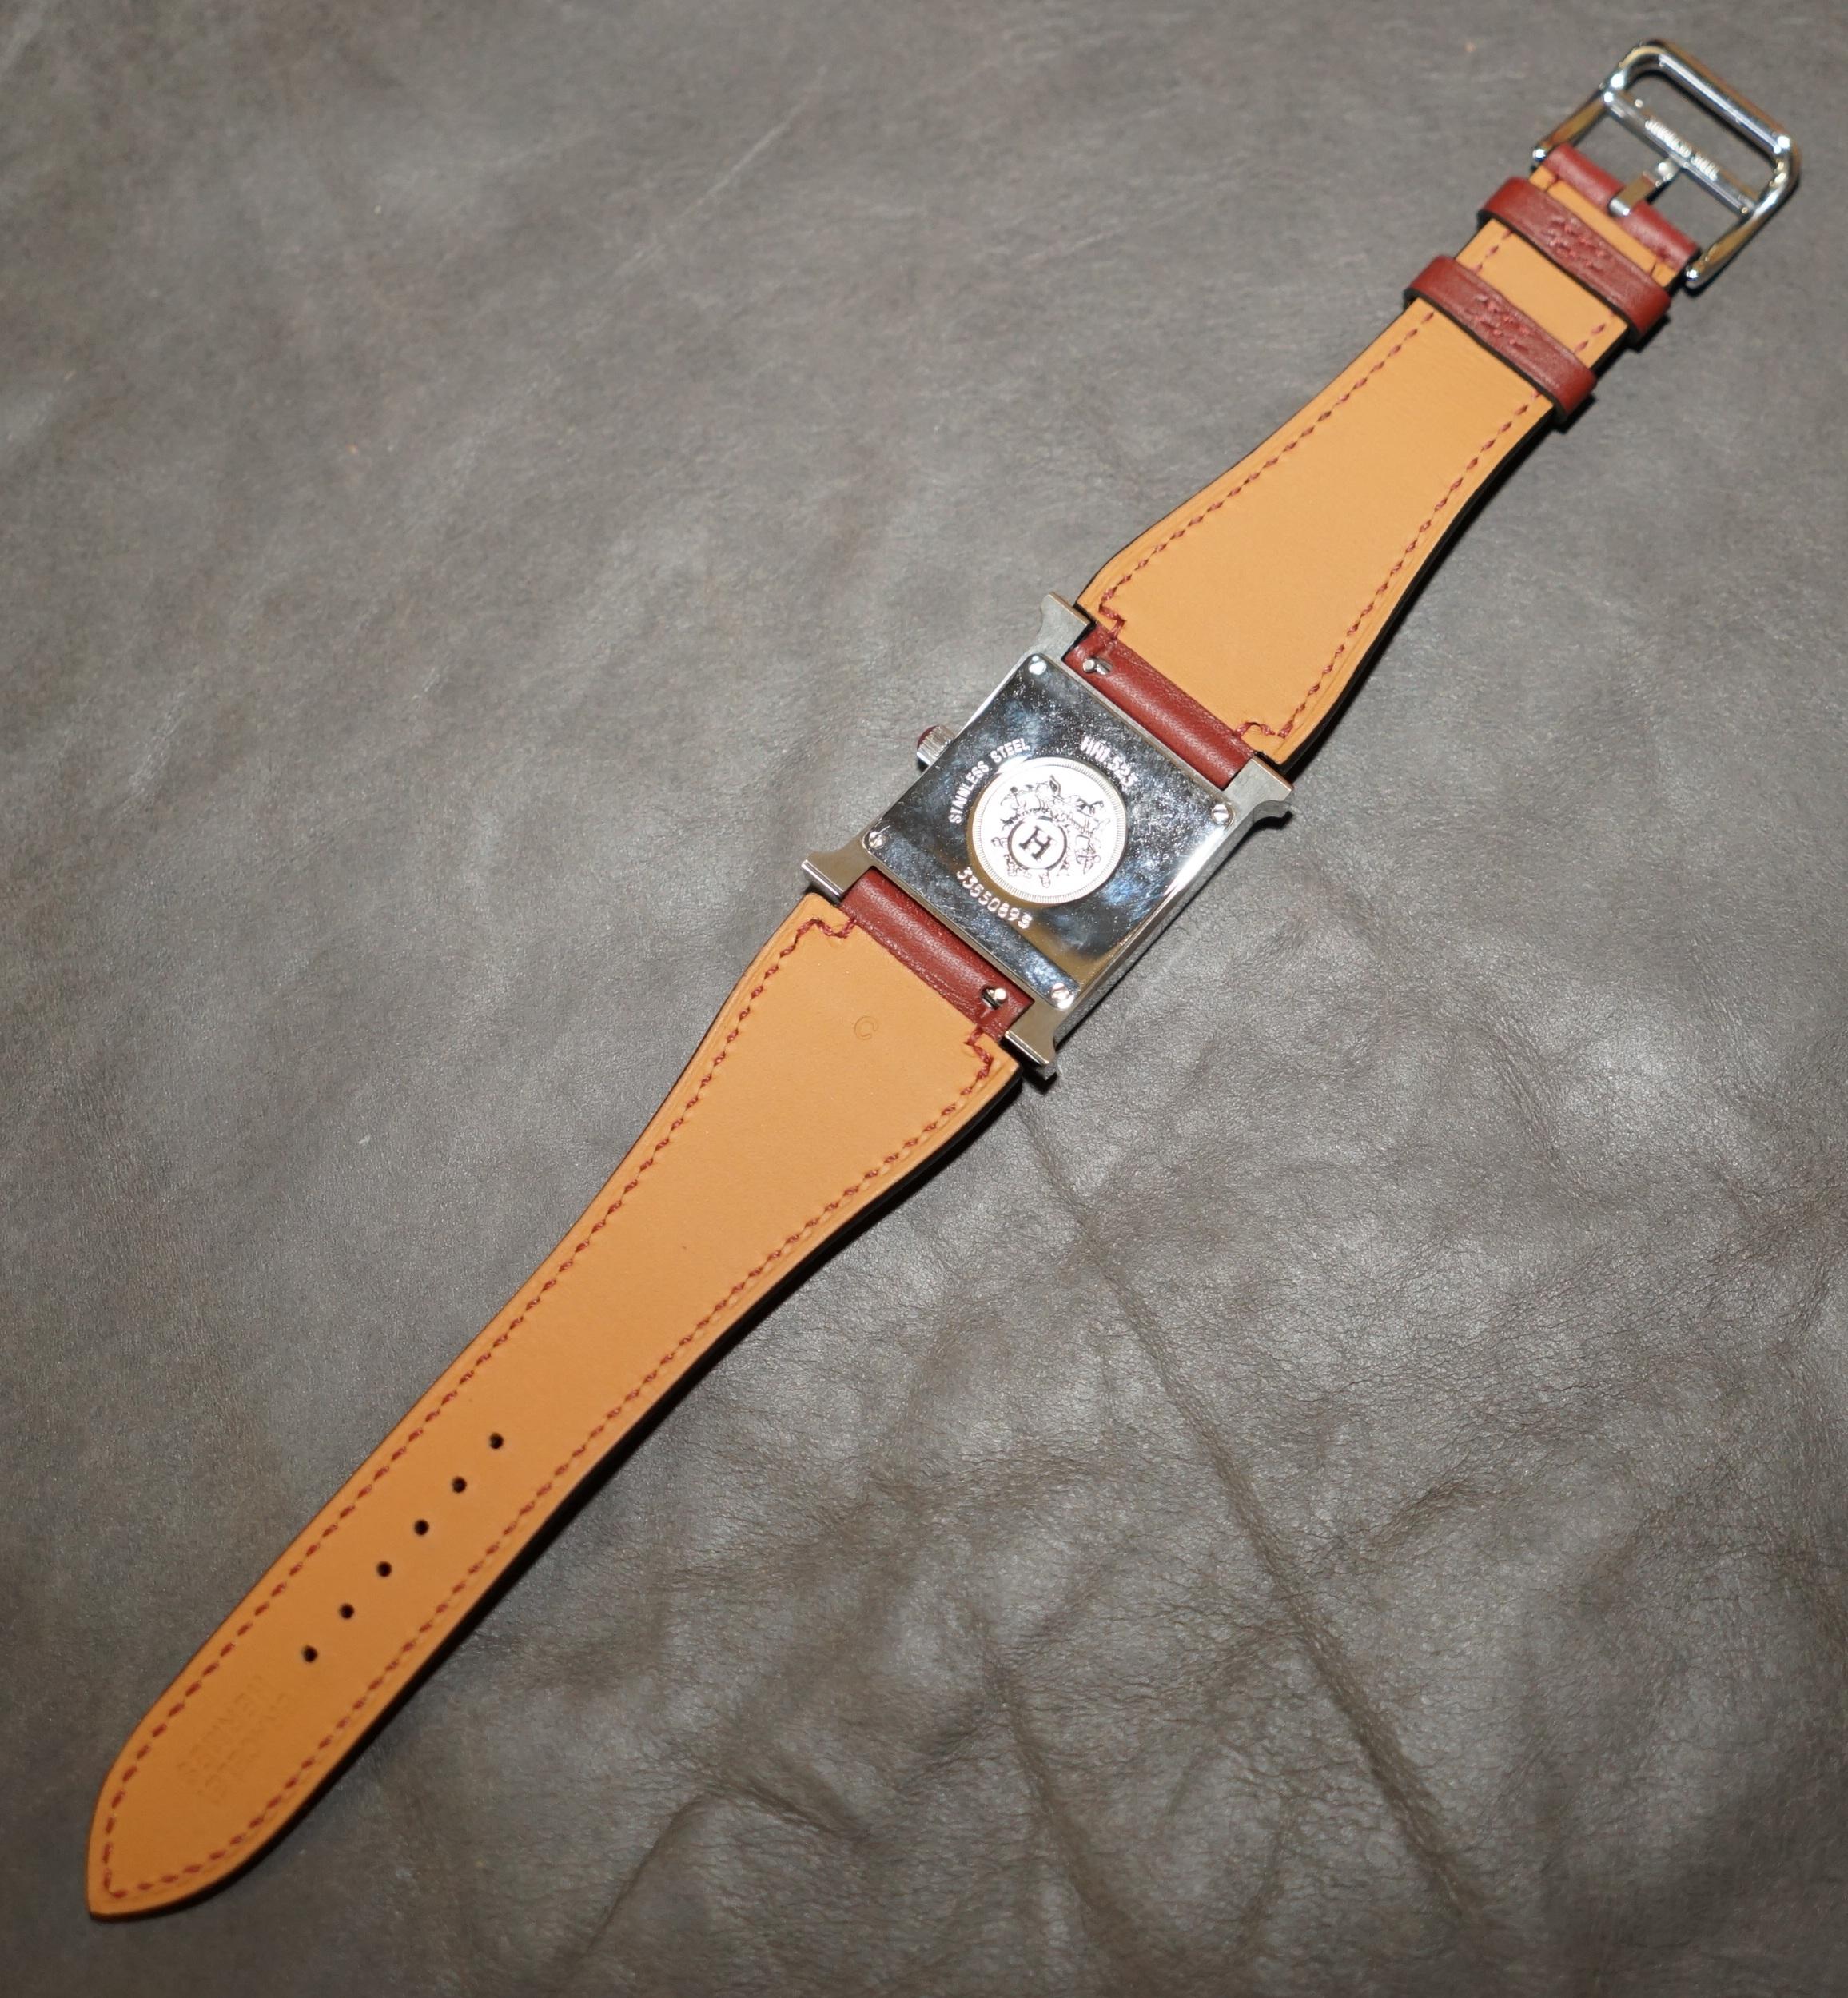 BRAND NEW IN THE ORIGiNAL BOX WITH PAPERWORK HERMES PARIS LTD EDITION H WATCH For Sale 7